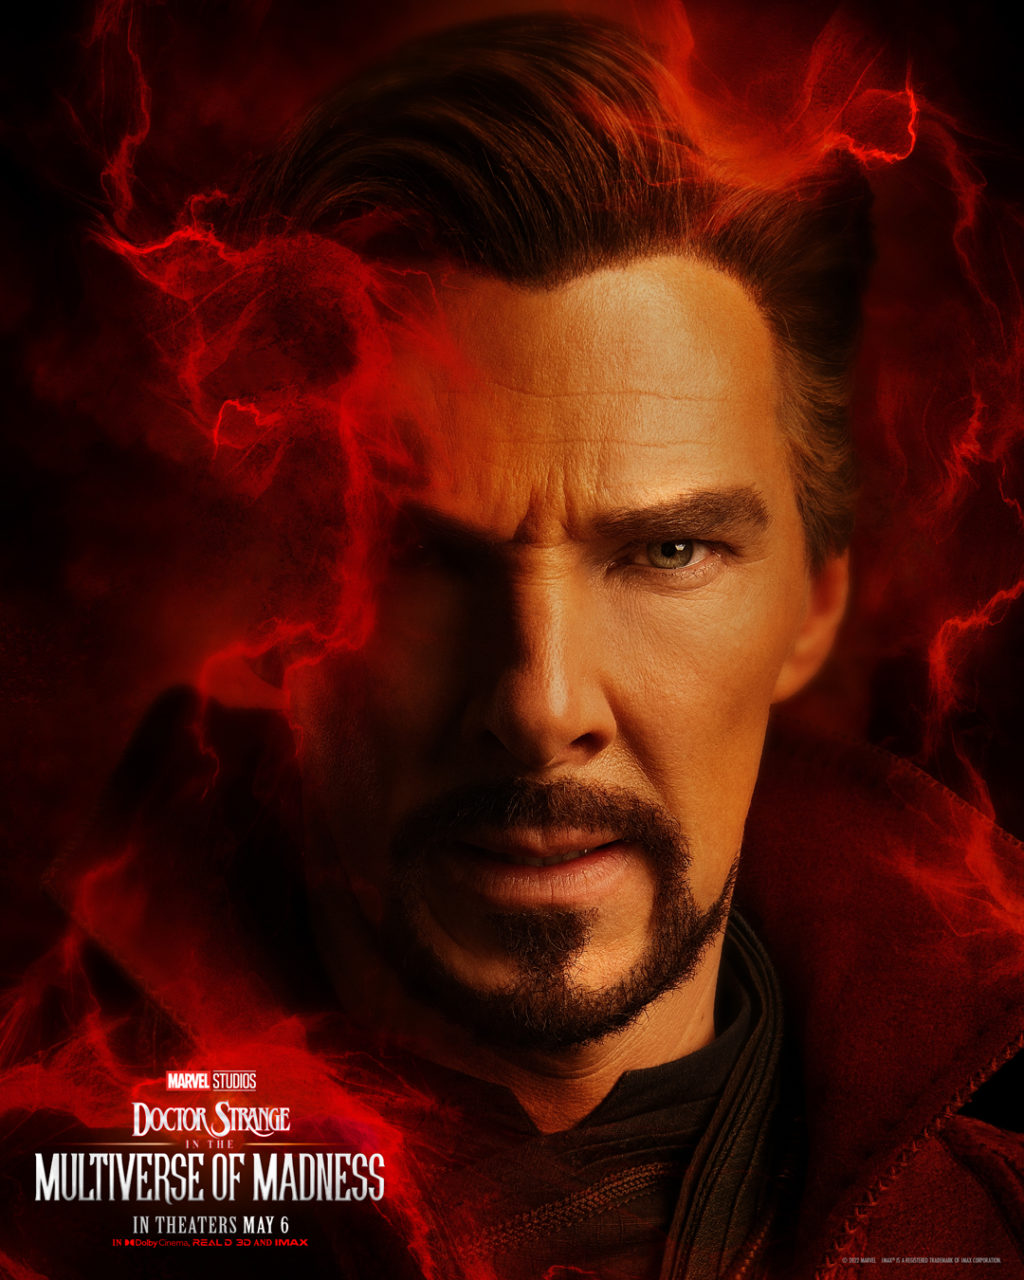 Doctor Strange In The Multiverse Of Madness character poster (Marvel Studios)